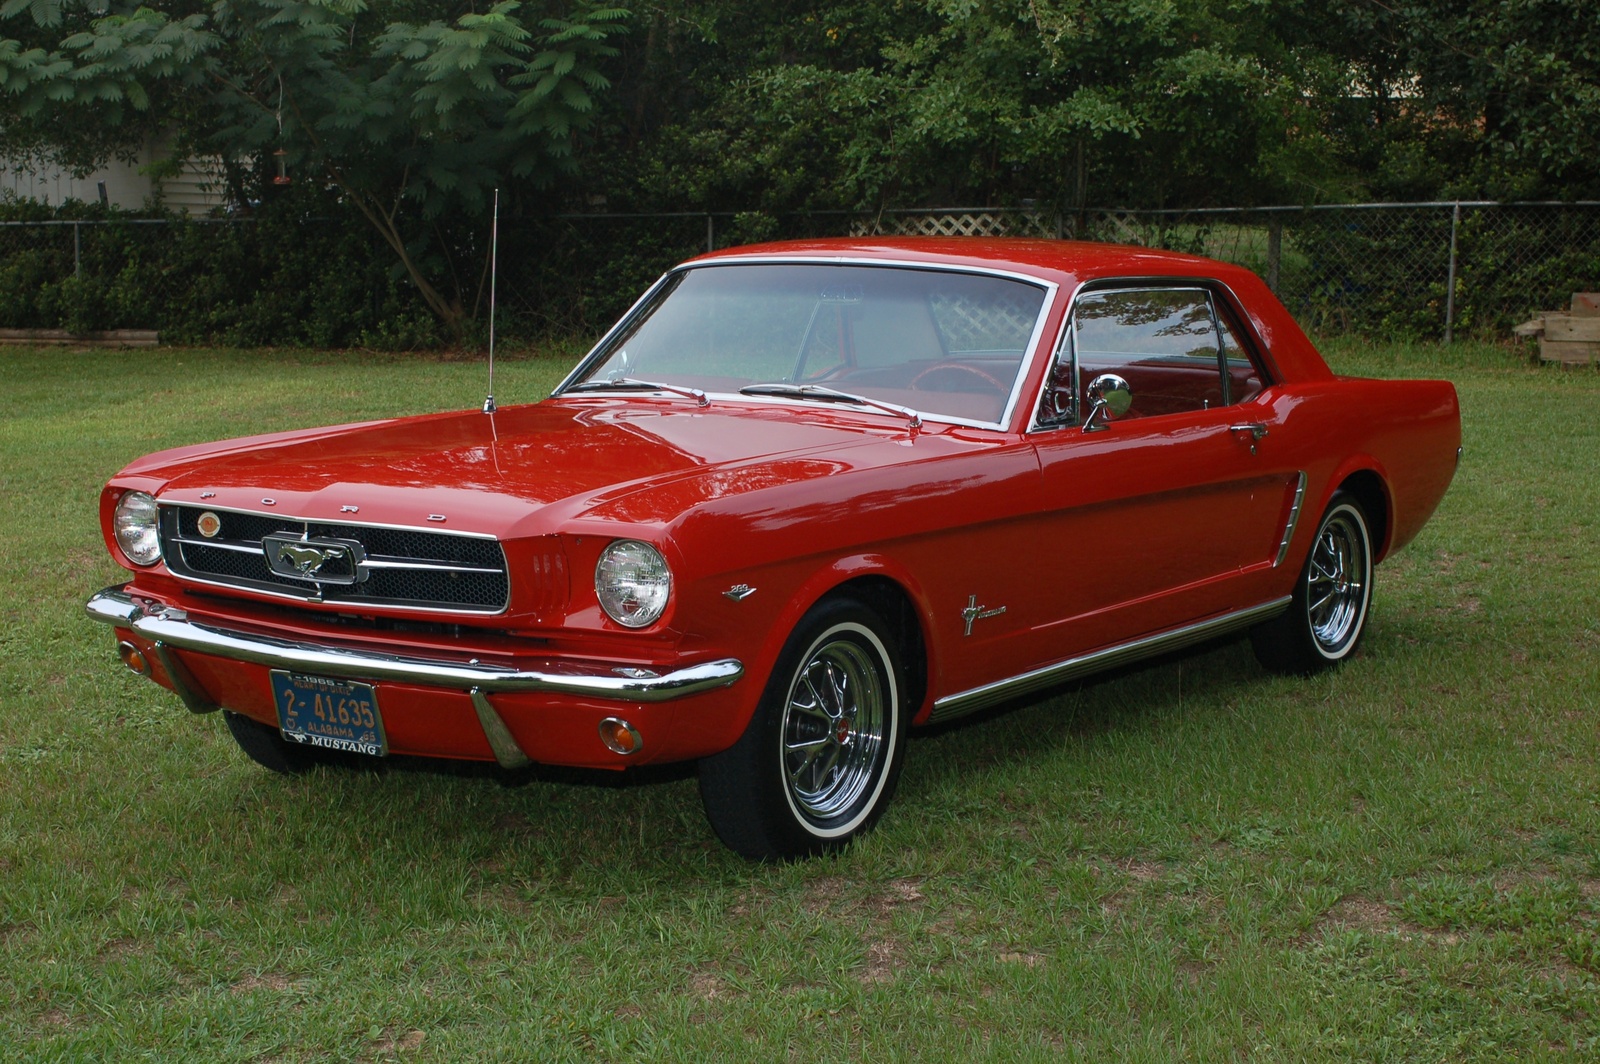 1965 Ford mustang coupe value #5